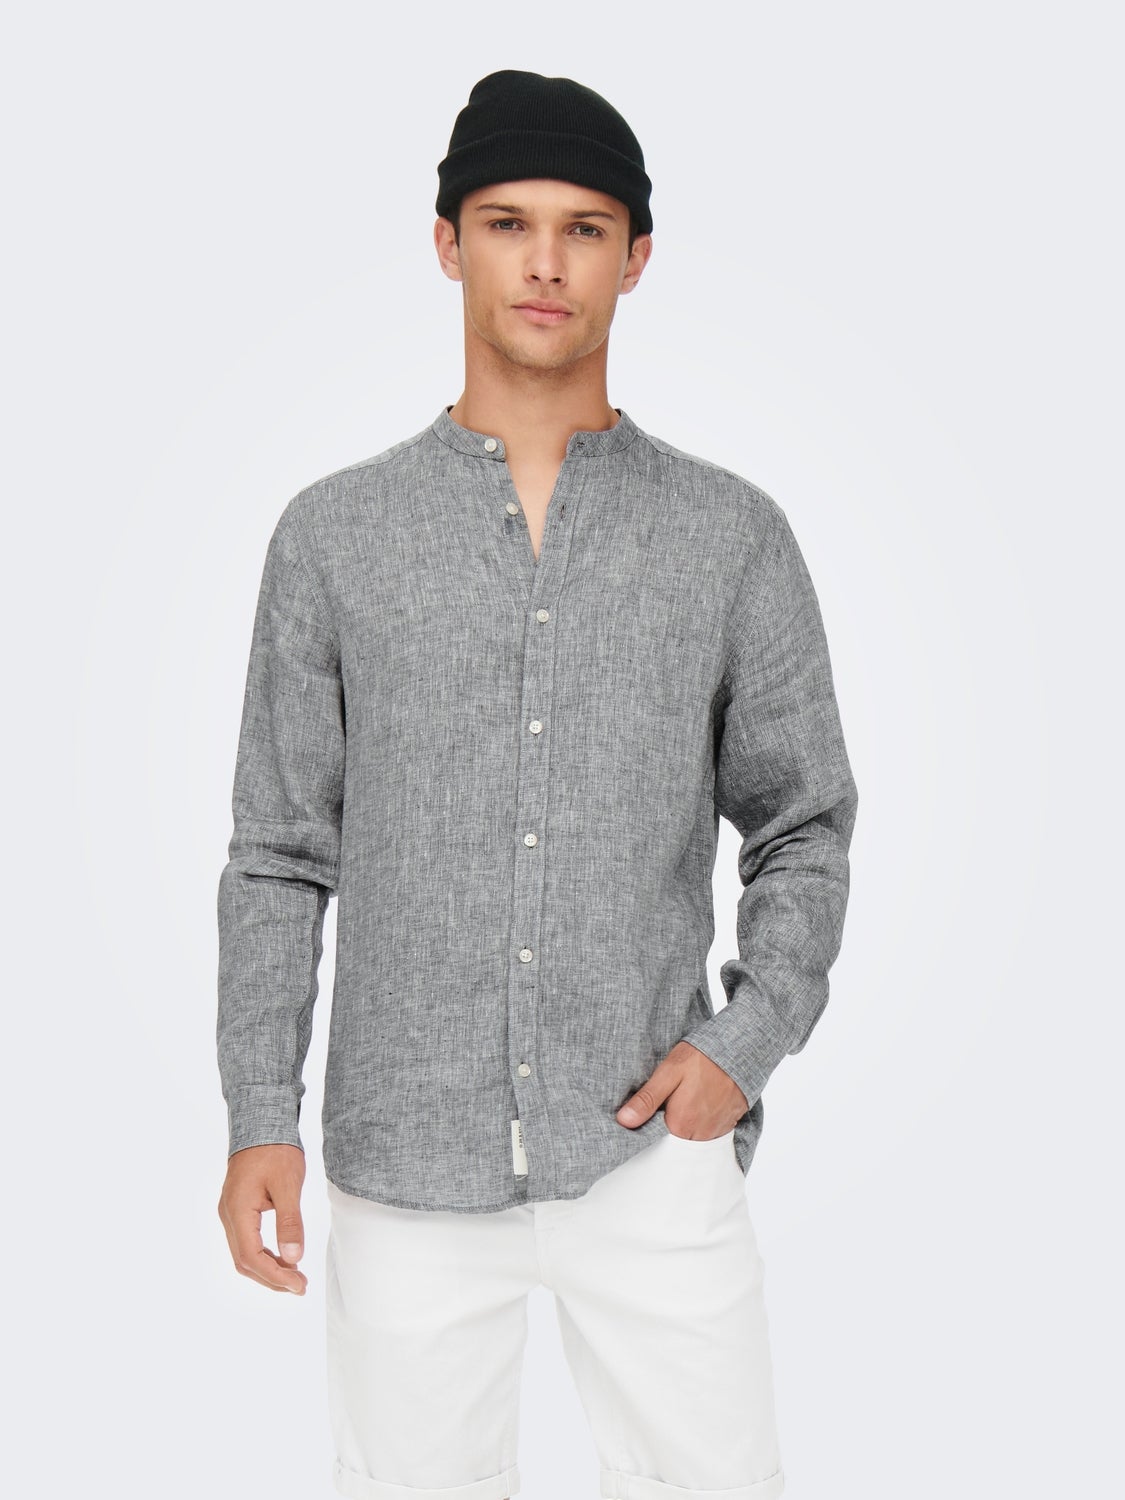 Men's Shirts for Men | ONLY  SONS